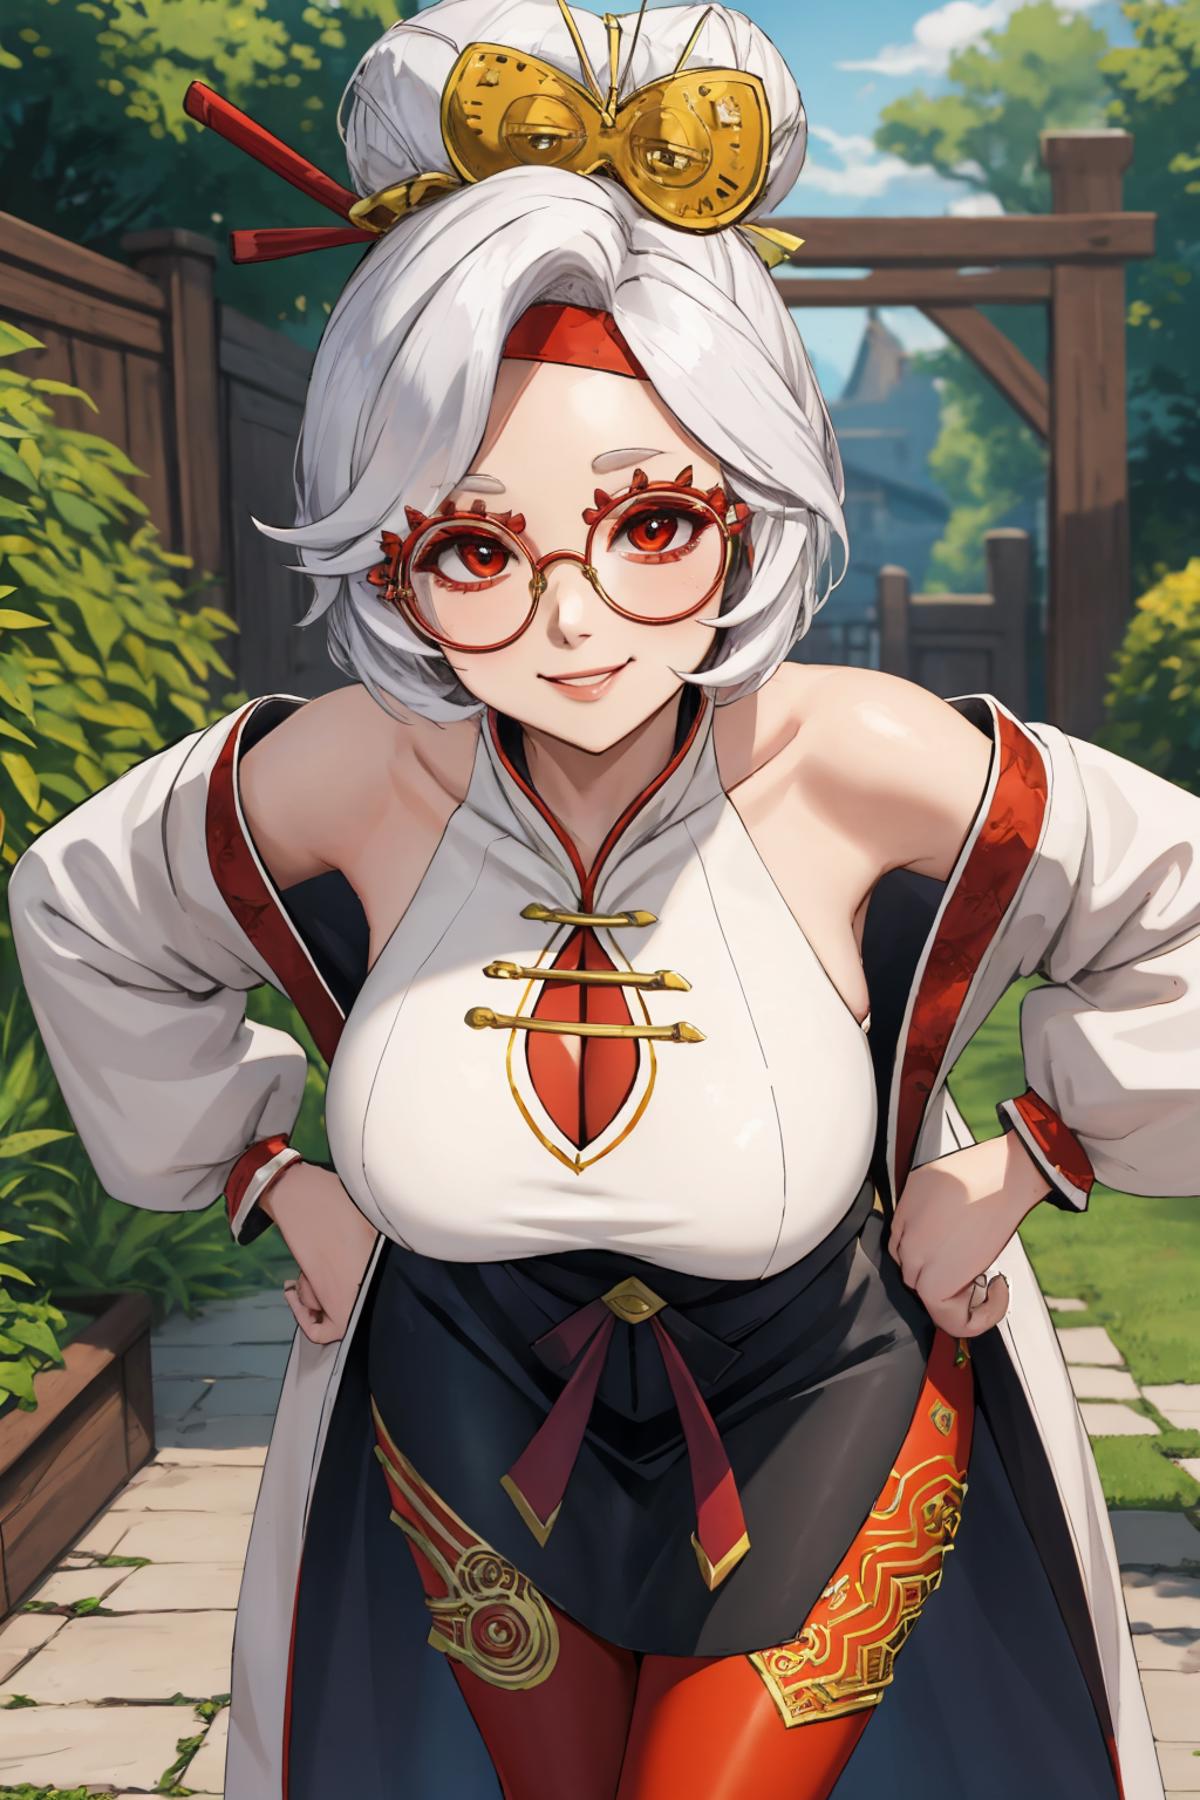 A cartoon woman with glasses and a white shirt with red trim.